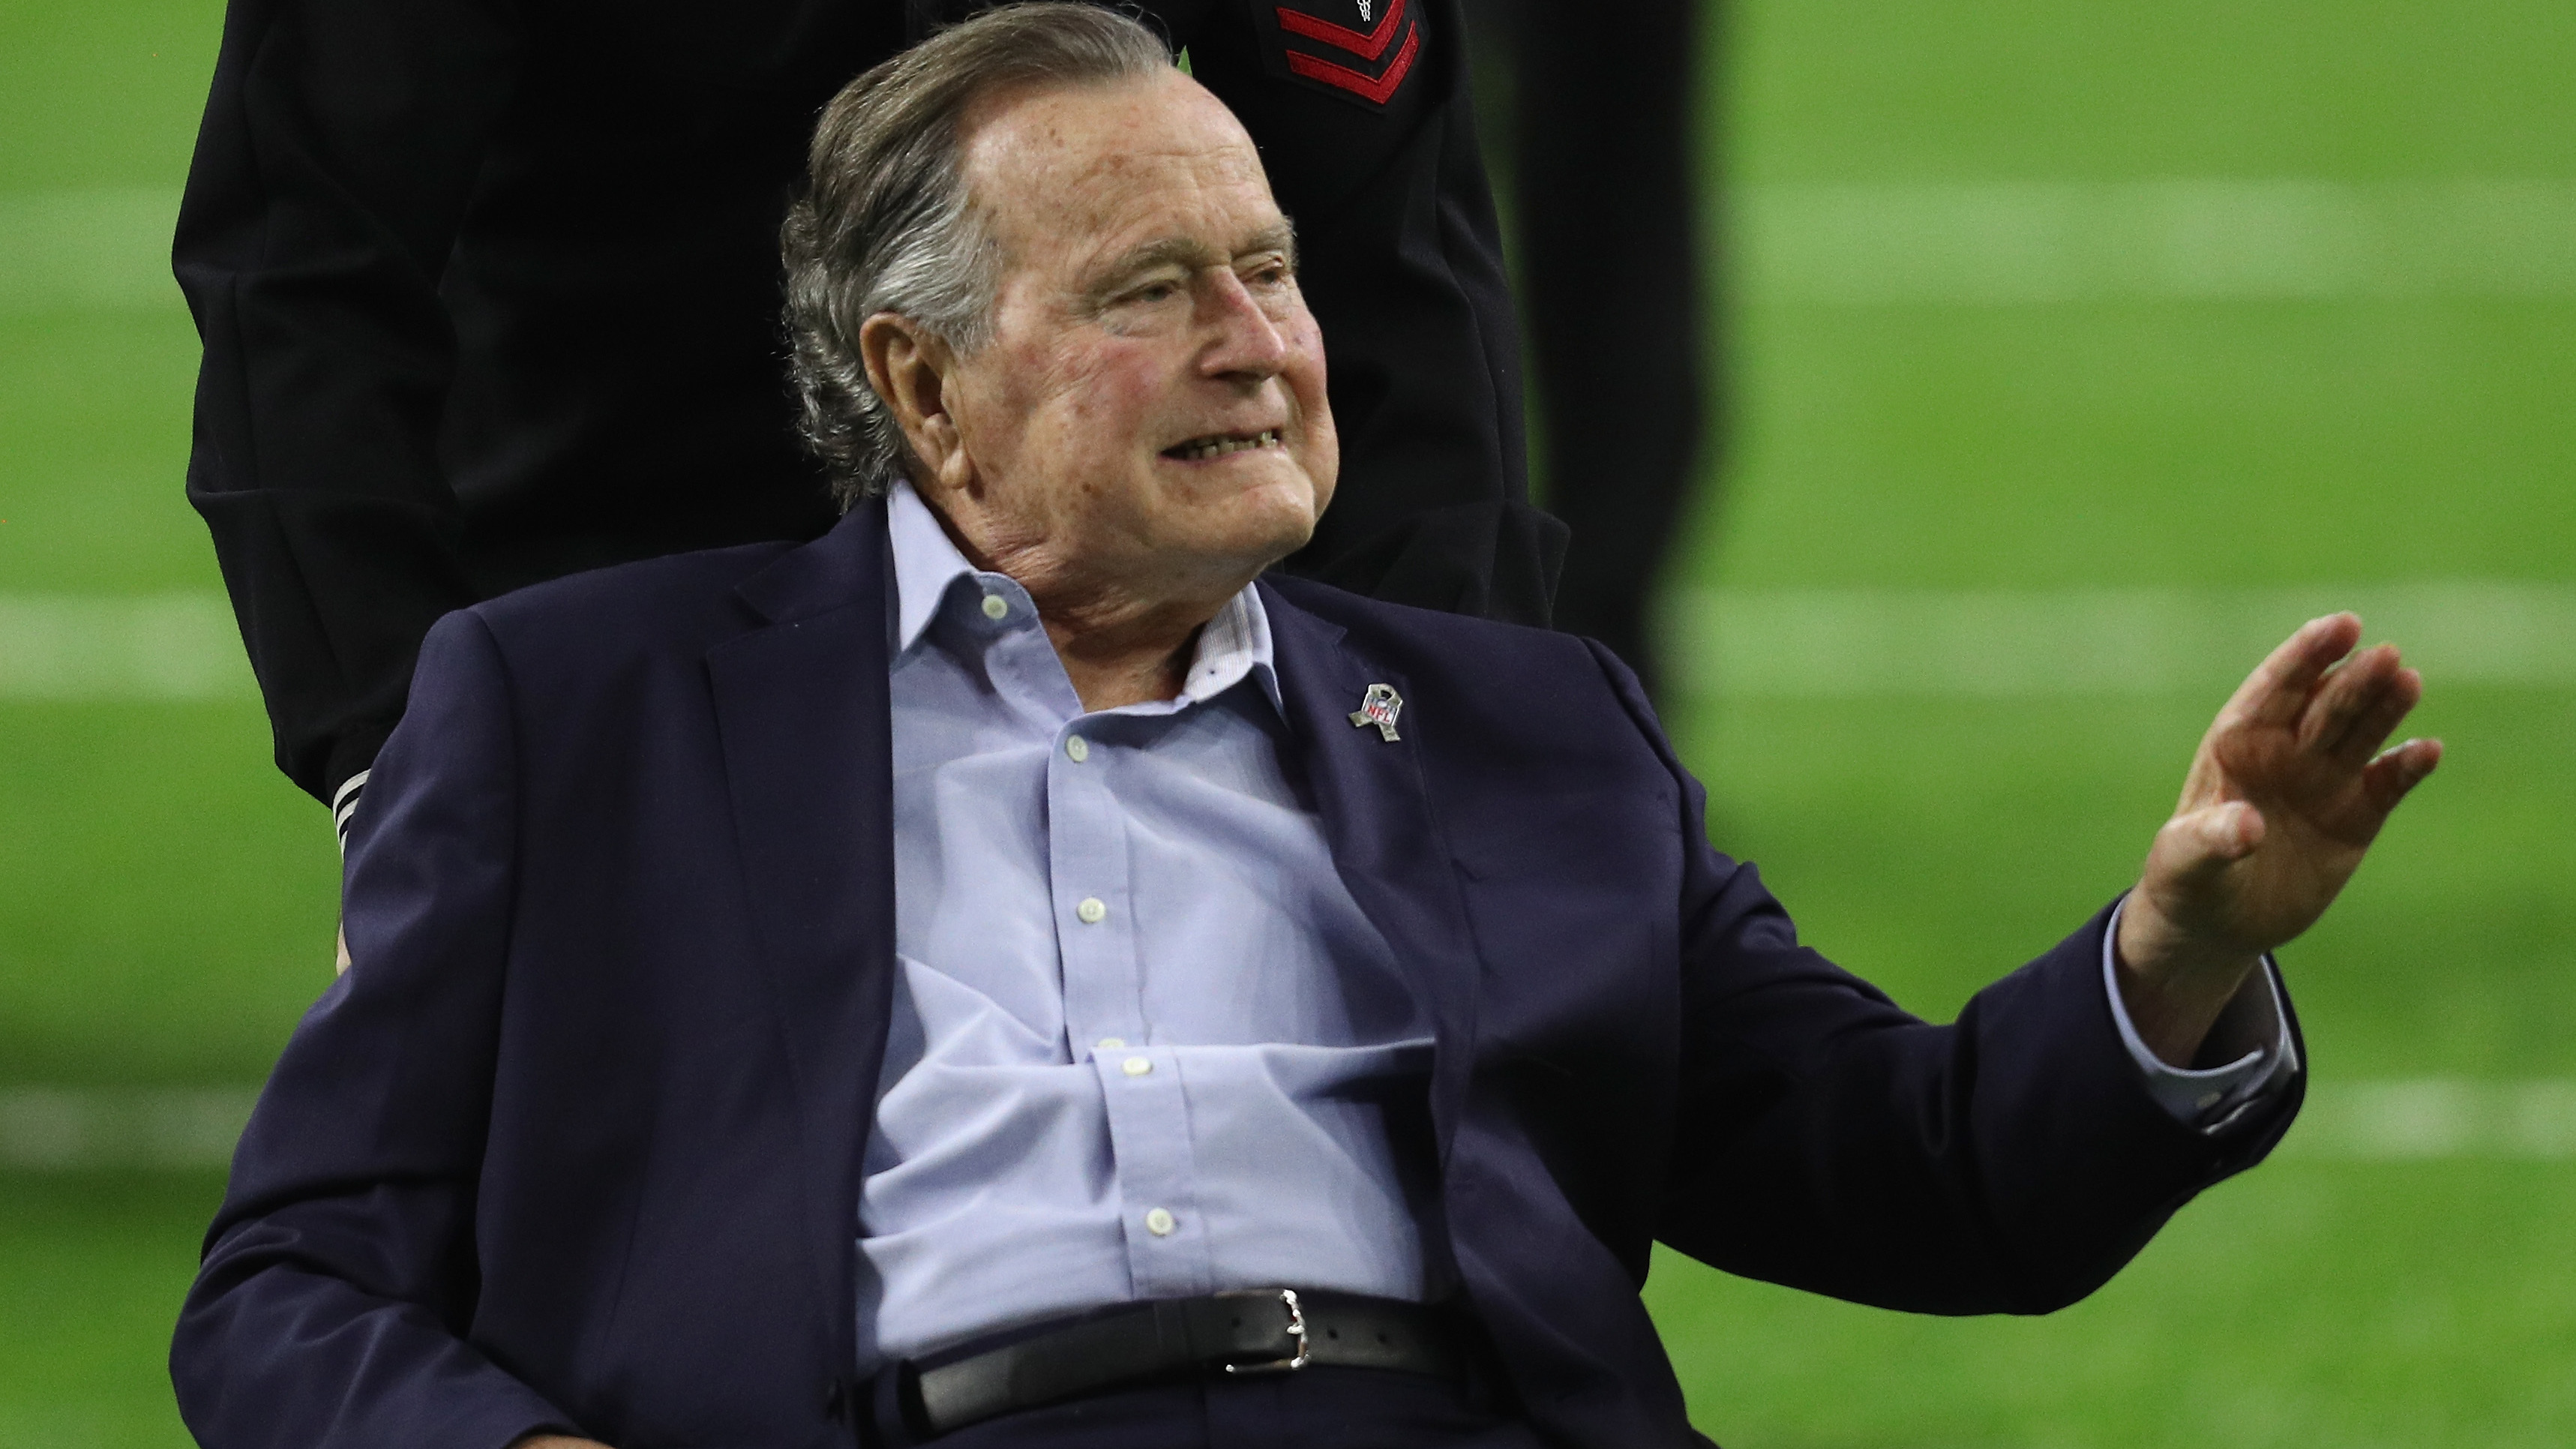 Former President George H.W. Bush arrives for the coin toss for the 2017 Super Bowl in Houston.